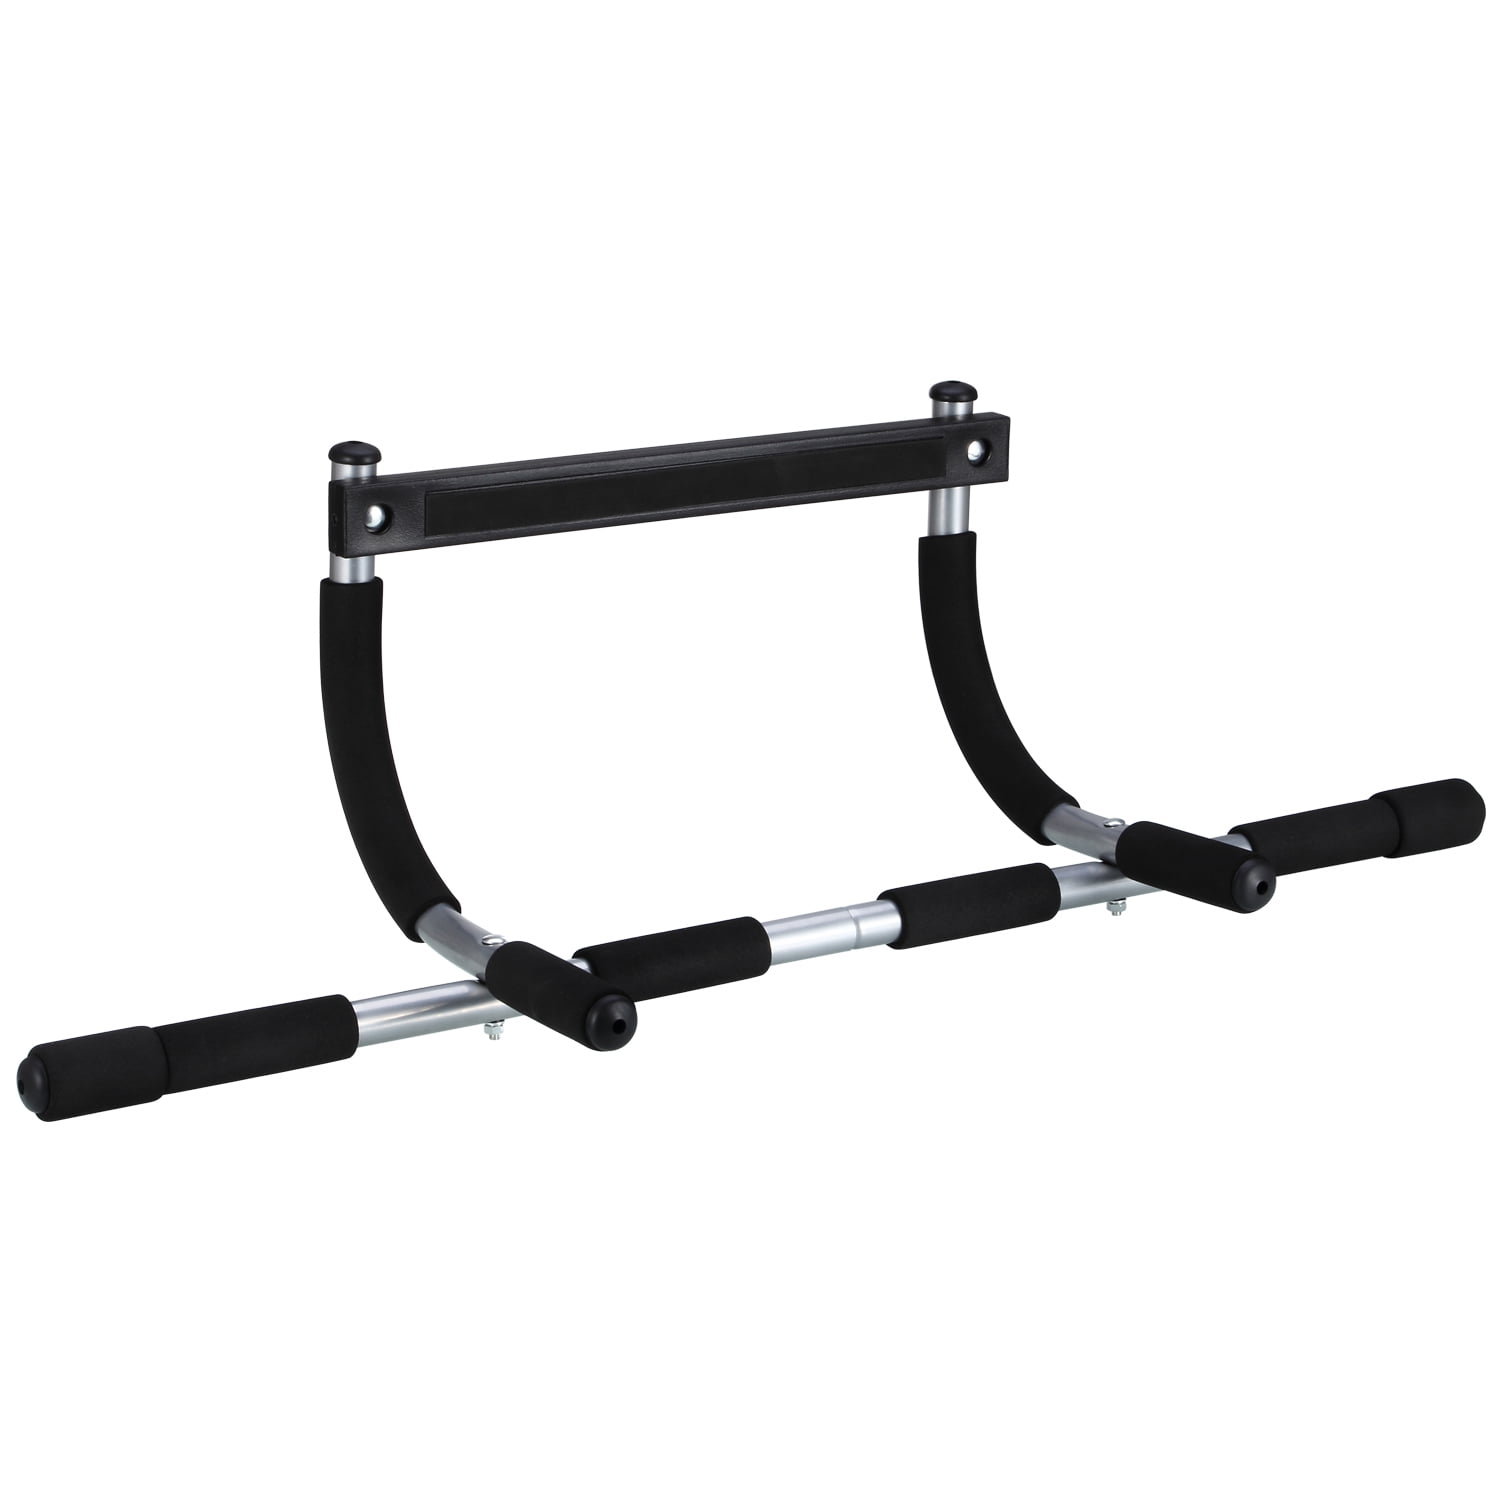 Mllieroo Multifunctional Pull Up Bar Portable Chin Up Upper Body ...